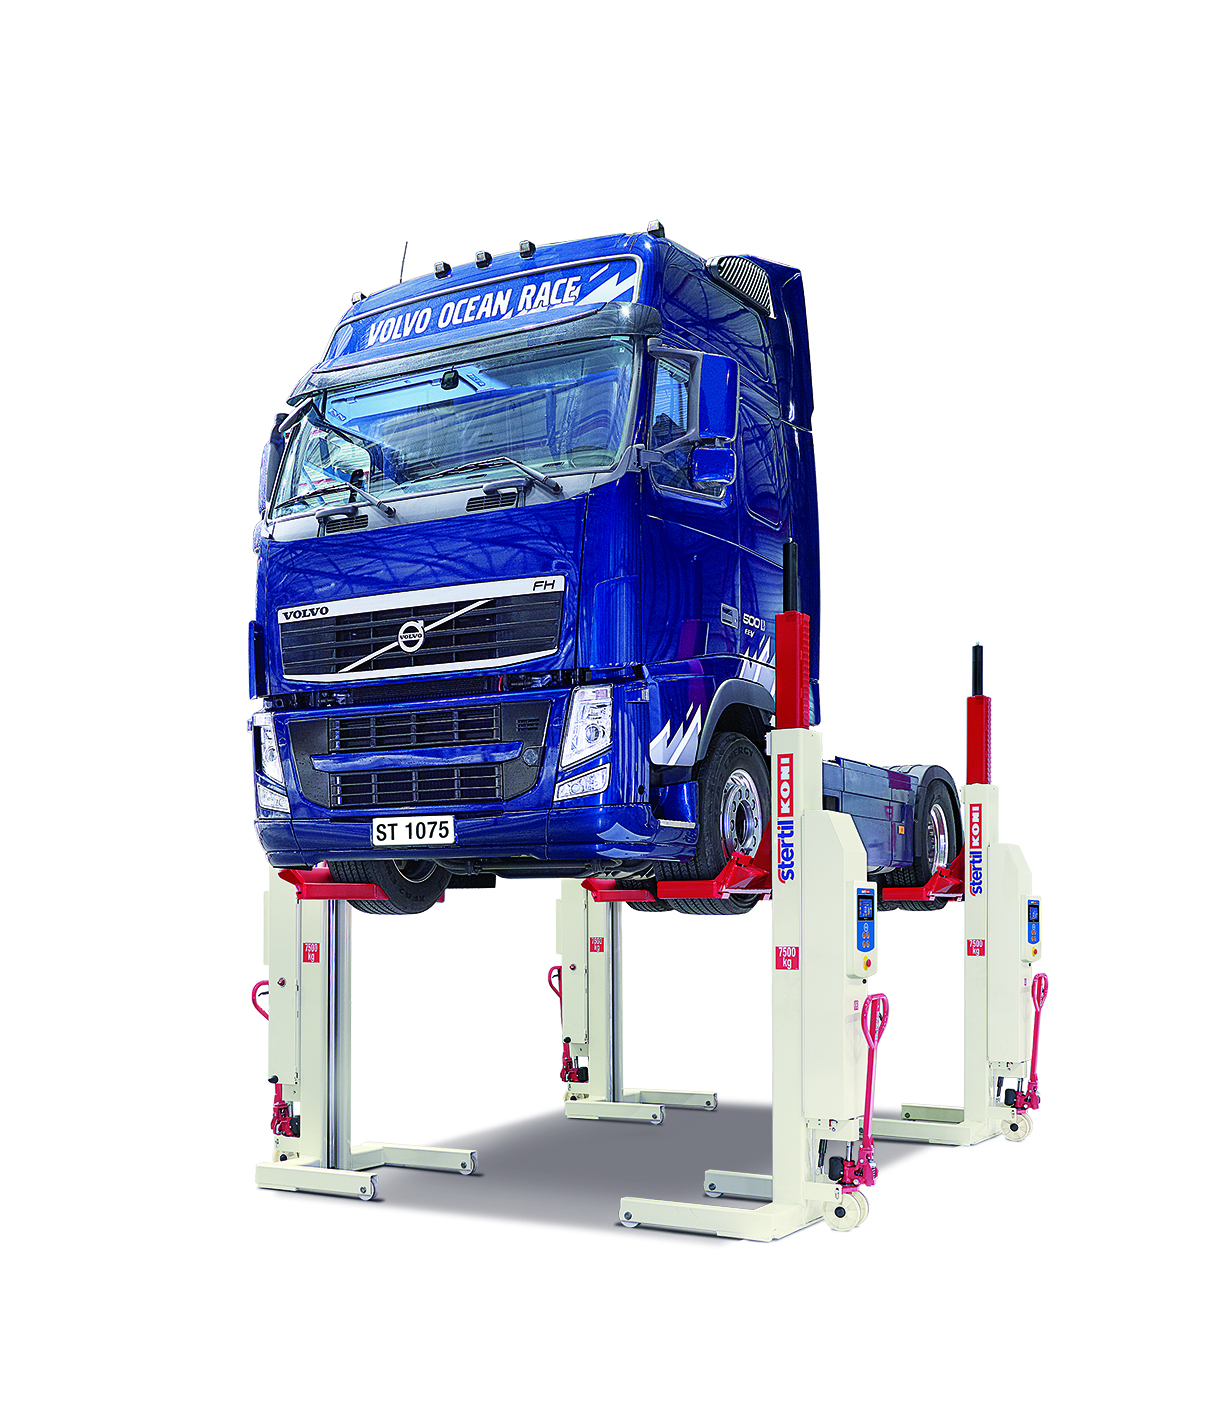 Stertil-Koni mobile column vehicle lift with
commercial truck